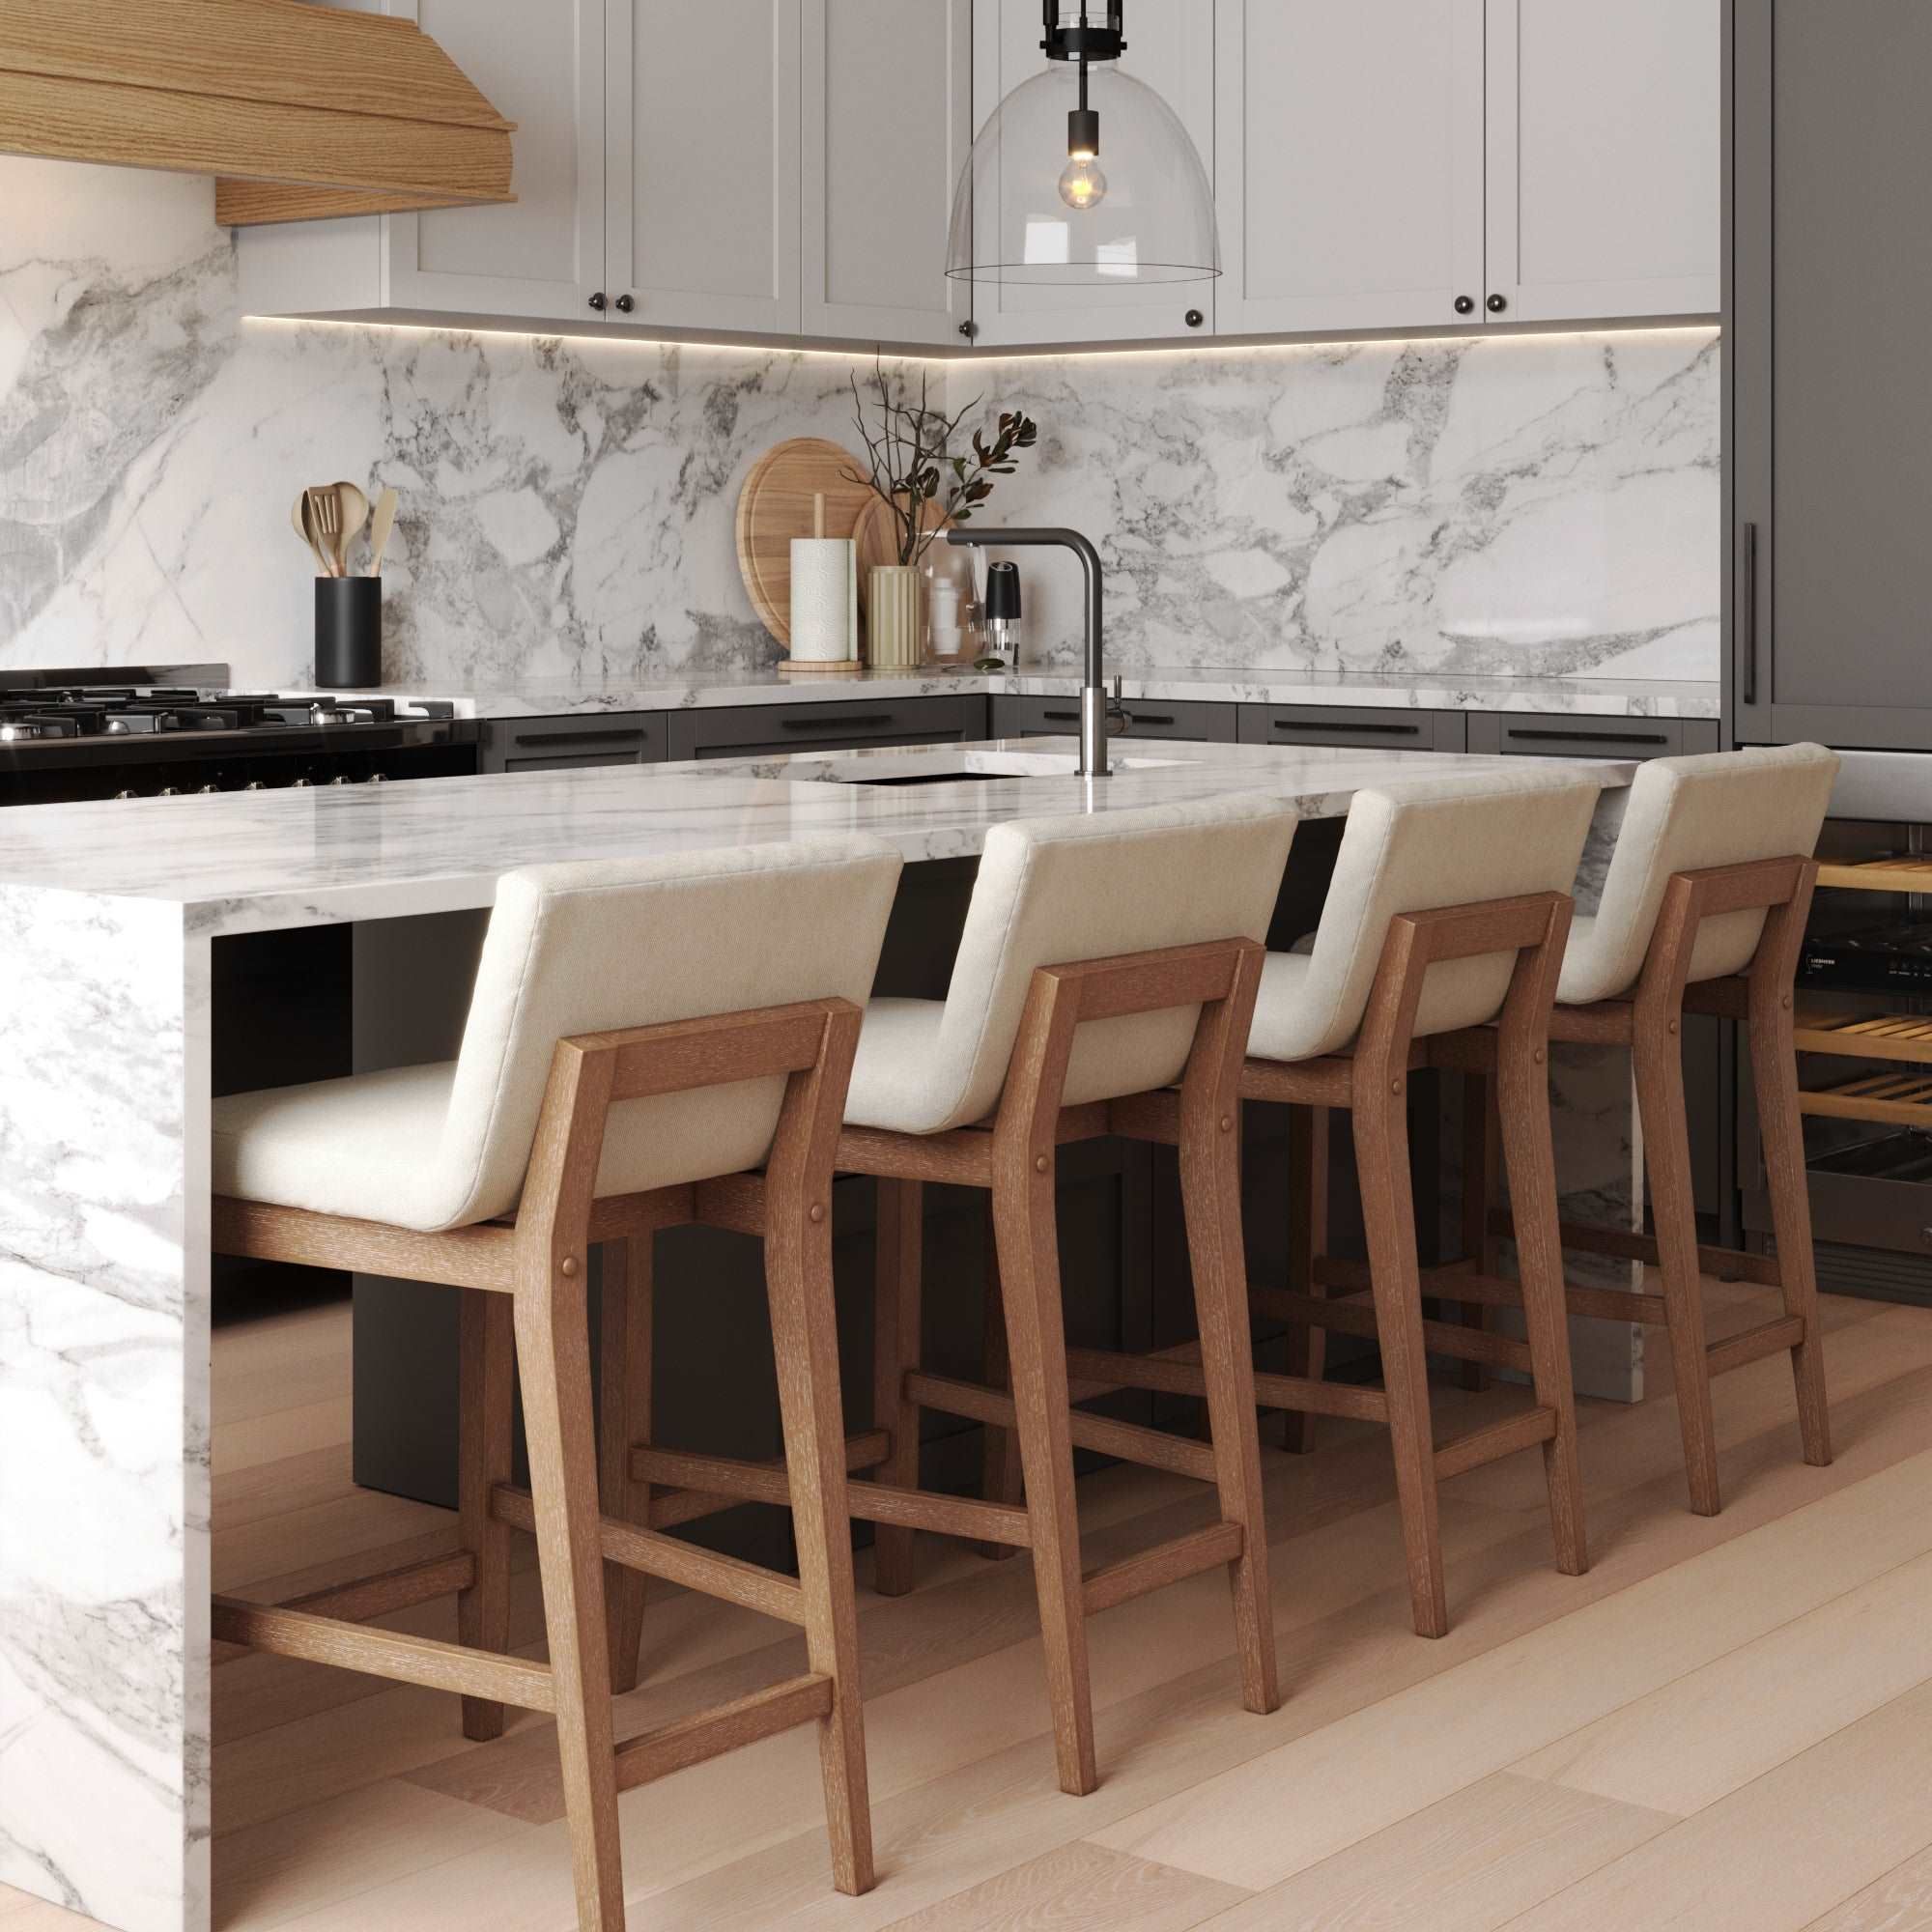 The Perfect Perch: A Guide to Selecting
Stylish and Functional Kitchen Stools